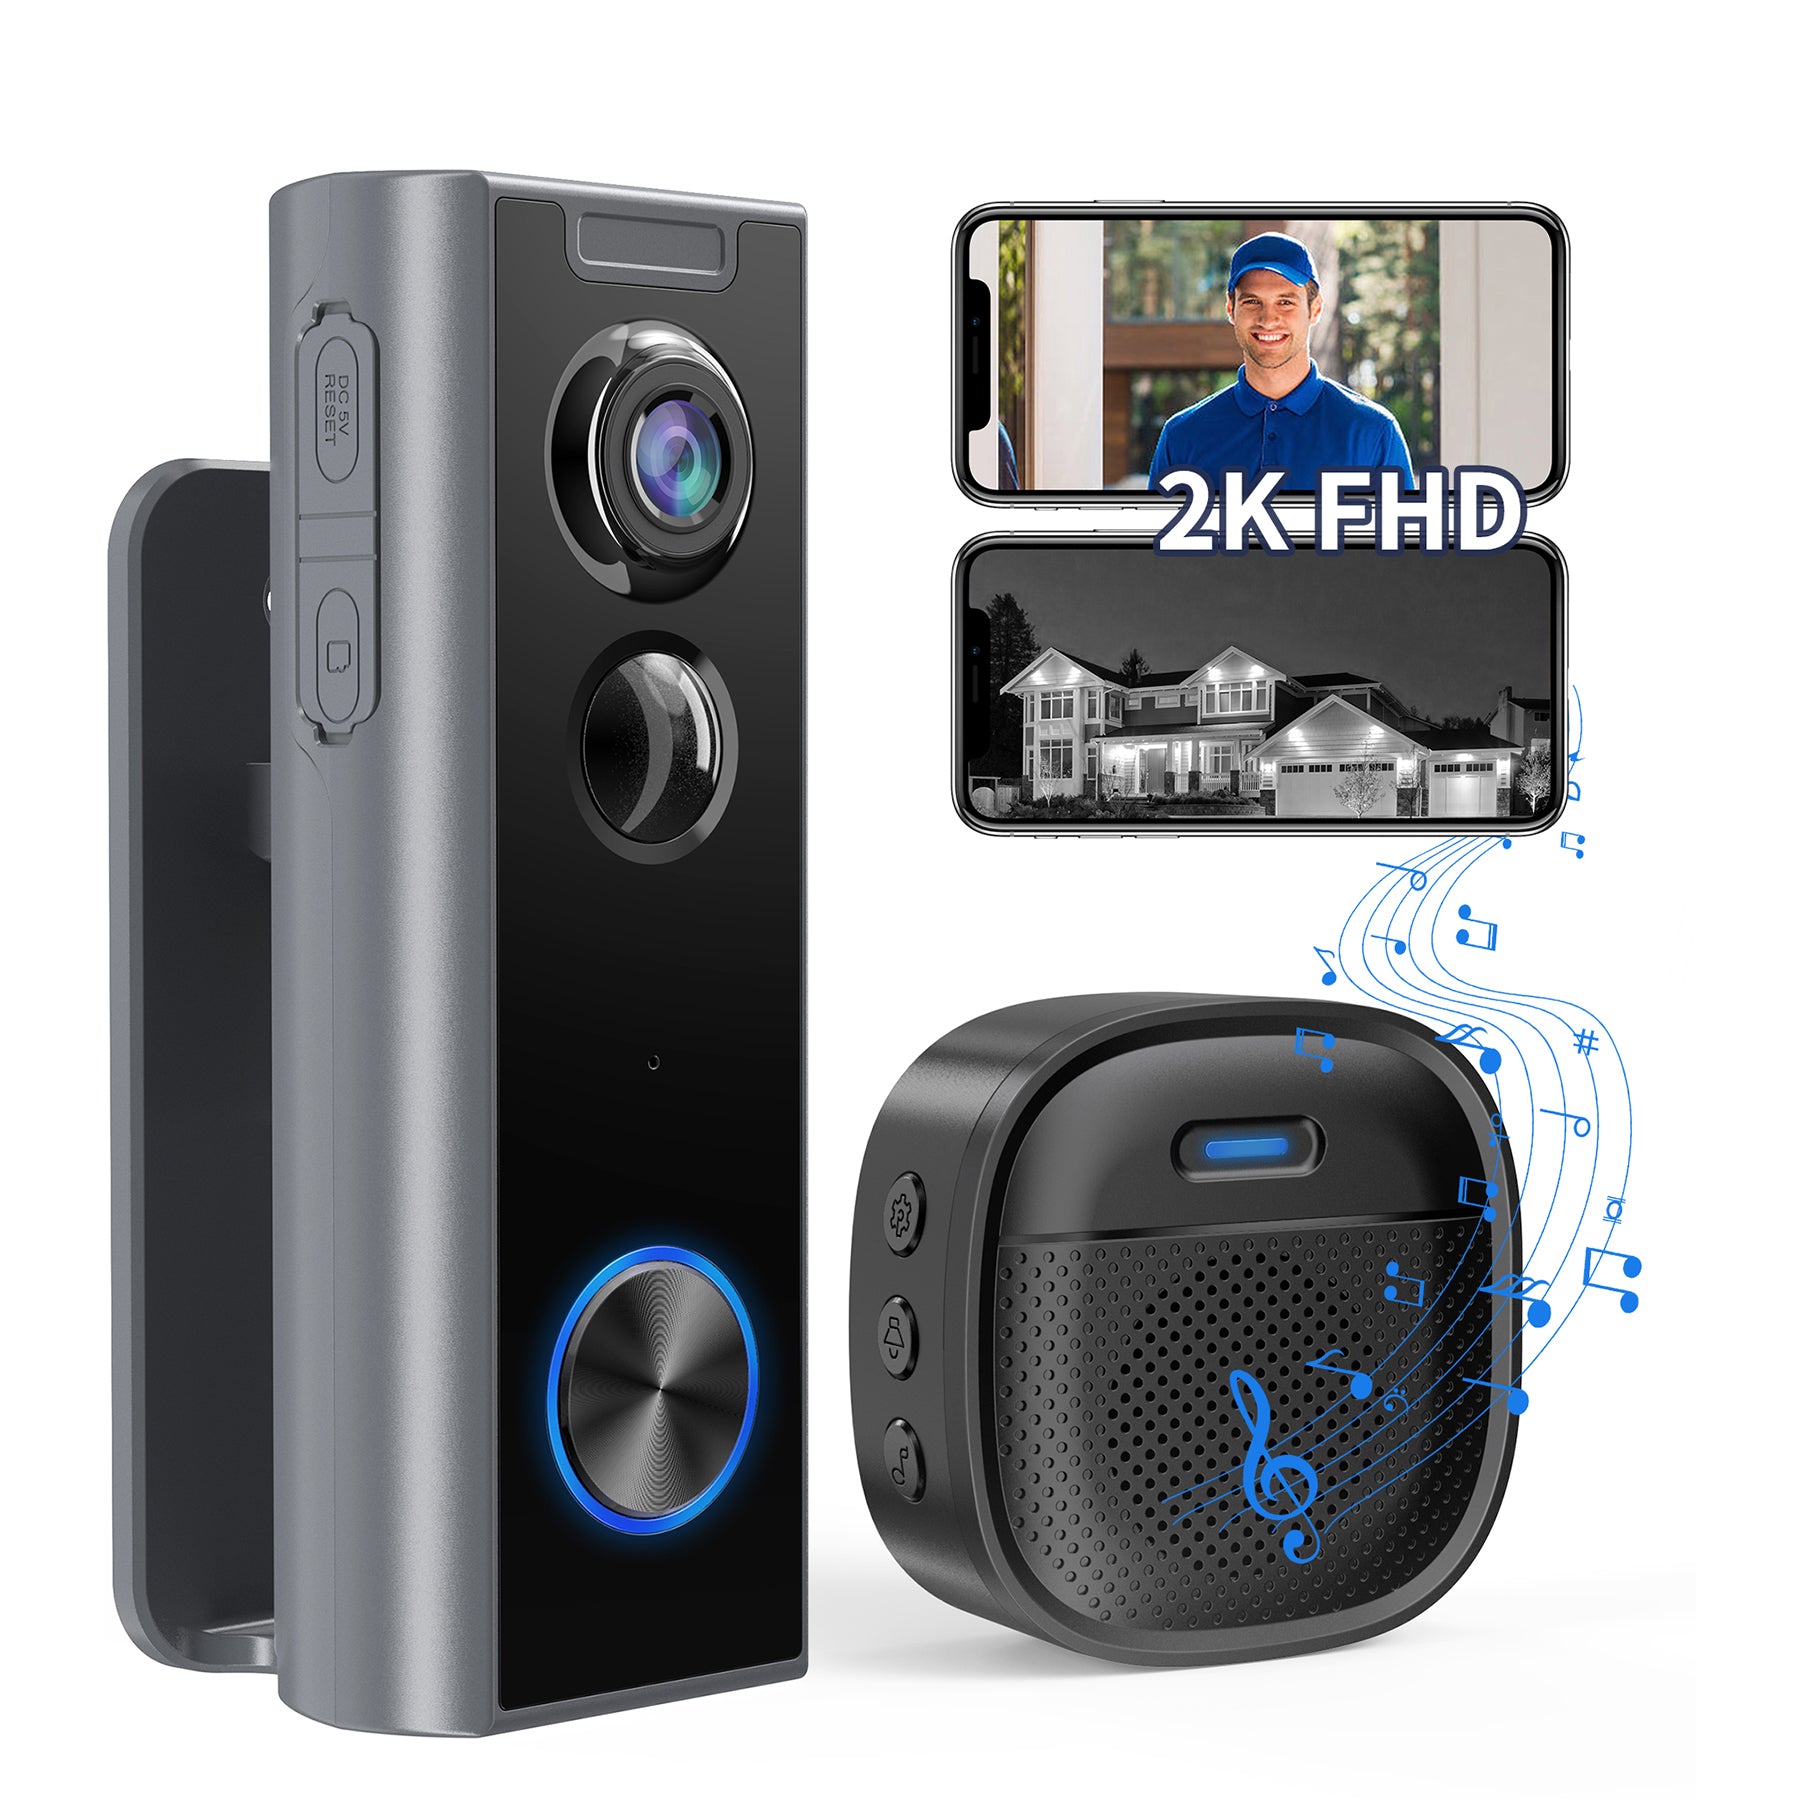 Ankway 2.4GHz Wifi Video Doorbell With Camera - 2K FHD Camera With Chime, PIR Detection, Night Vision, 2-Way Audio, Multi-Angle Mounting Bracket, Waterproof, Battery Powered, SD & Cloud Storage